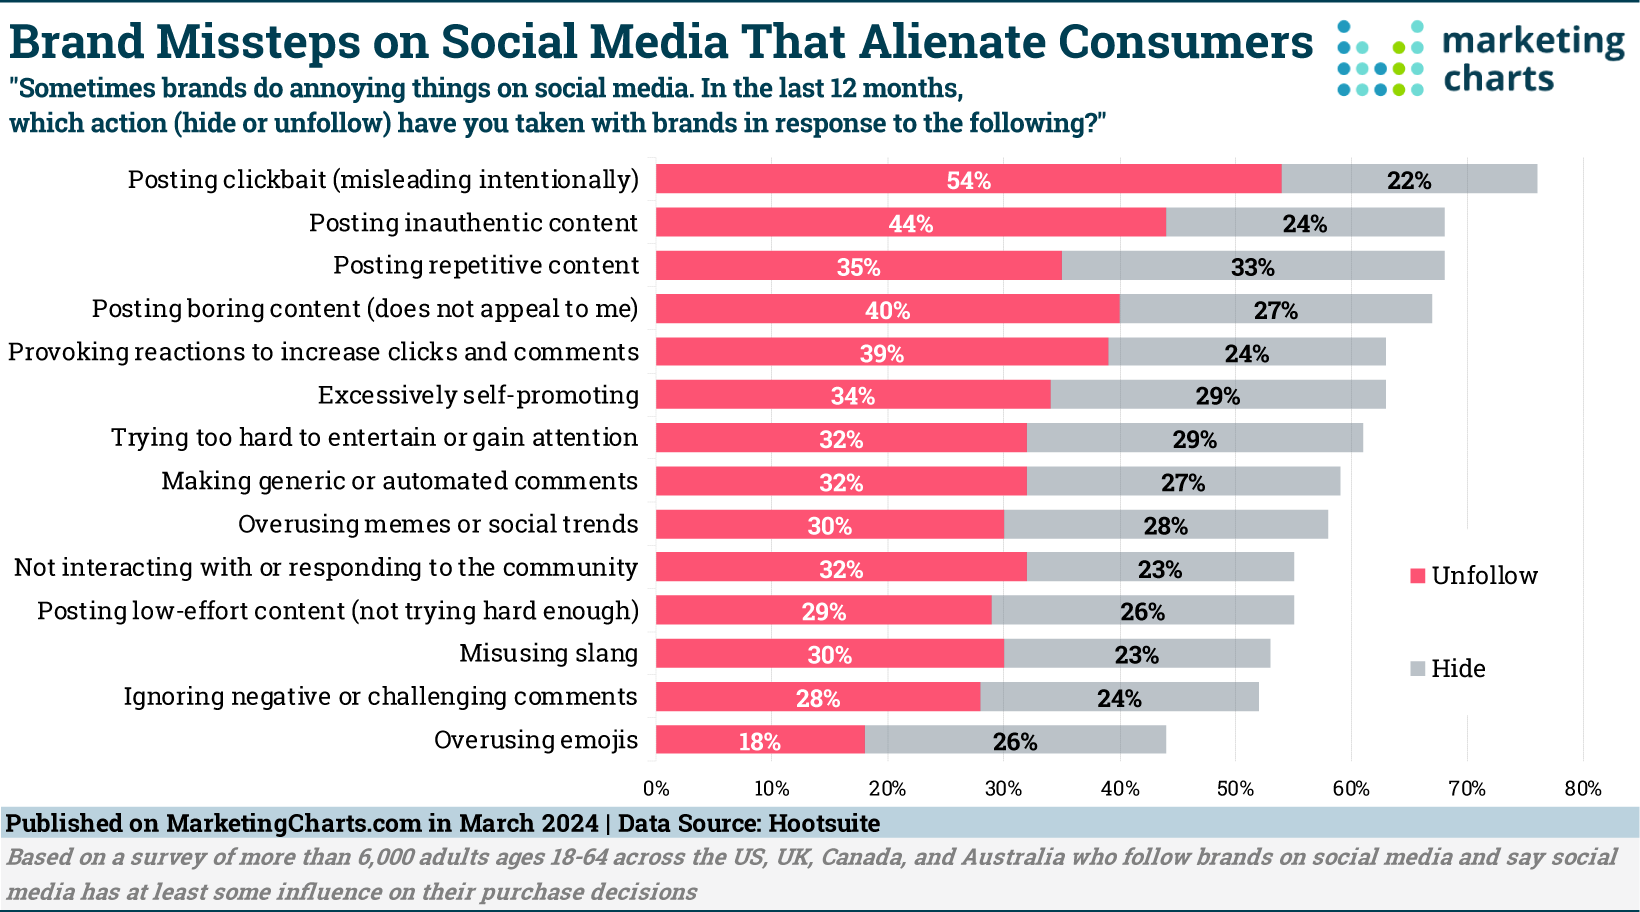 What Do Consumers Want from Brands on Social Media?